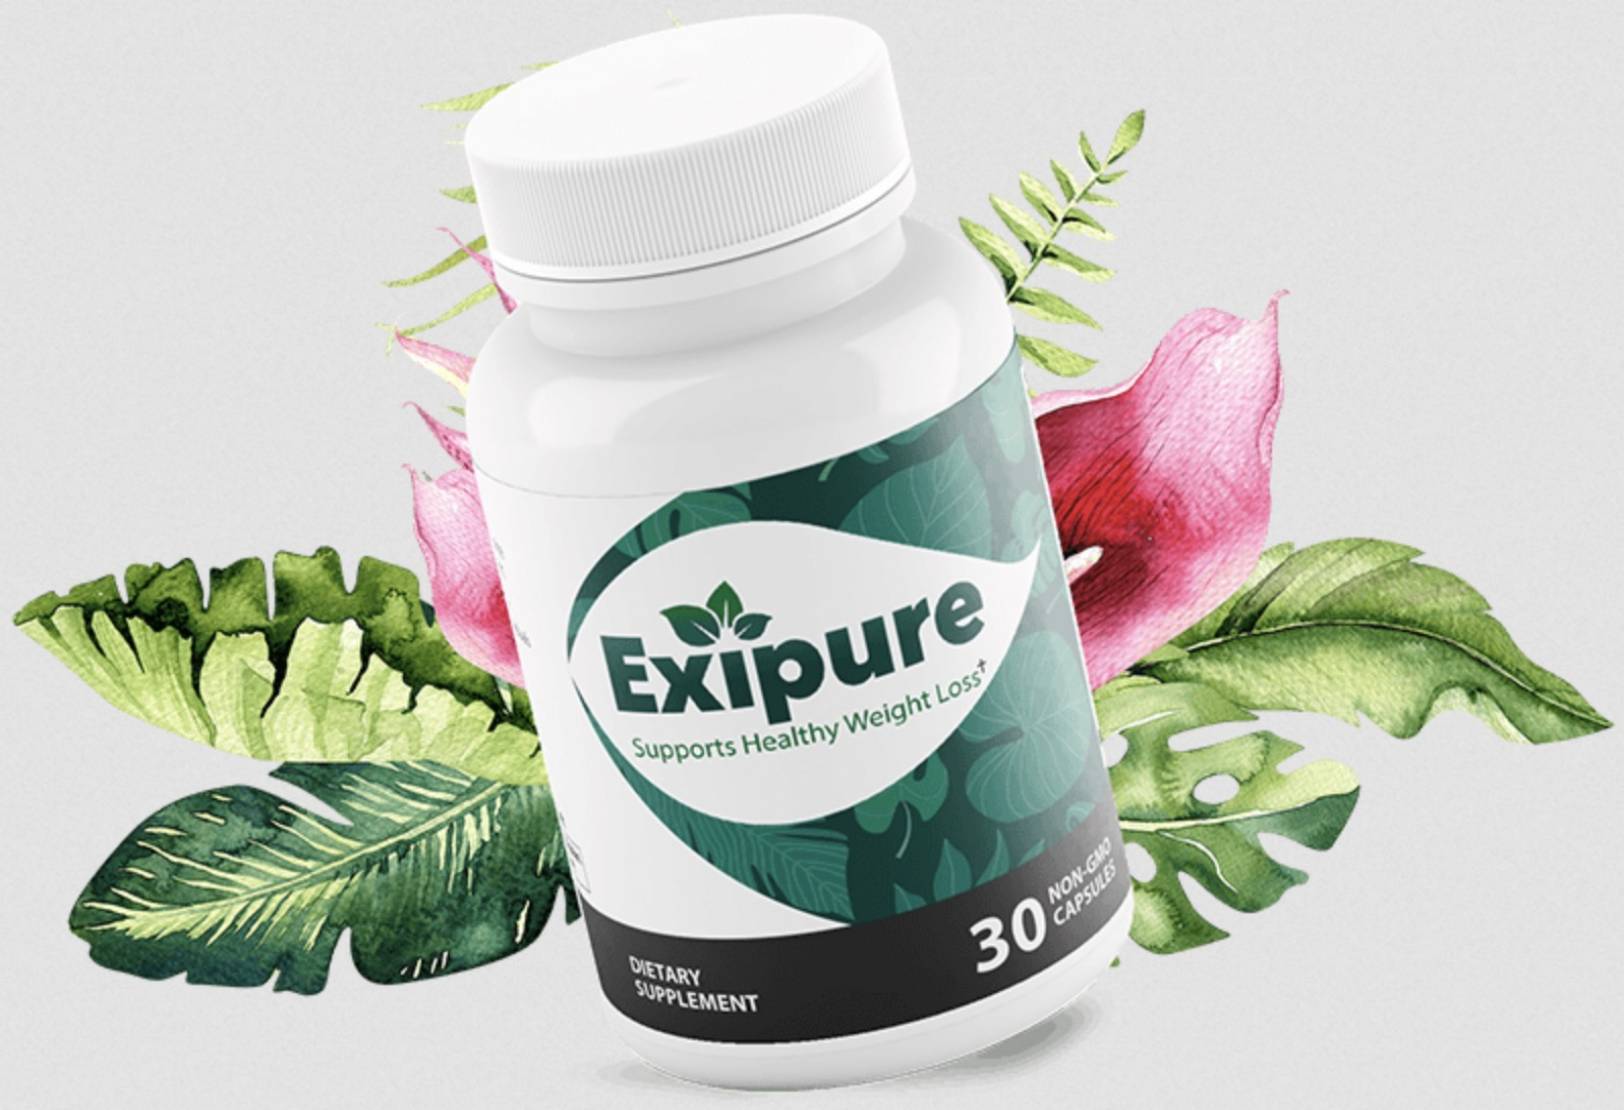 Exipure Images